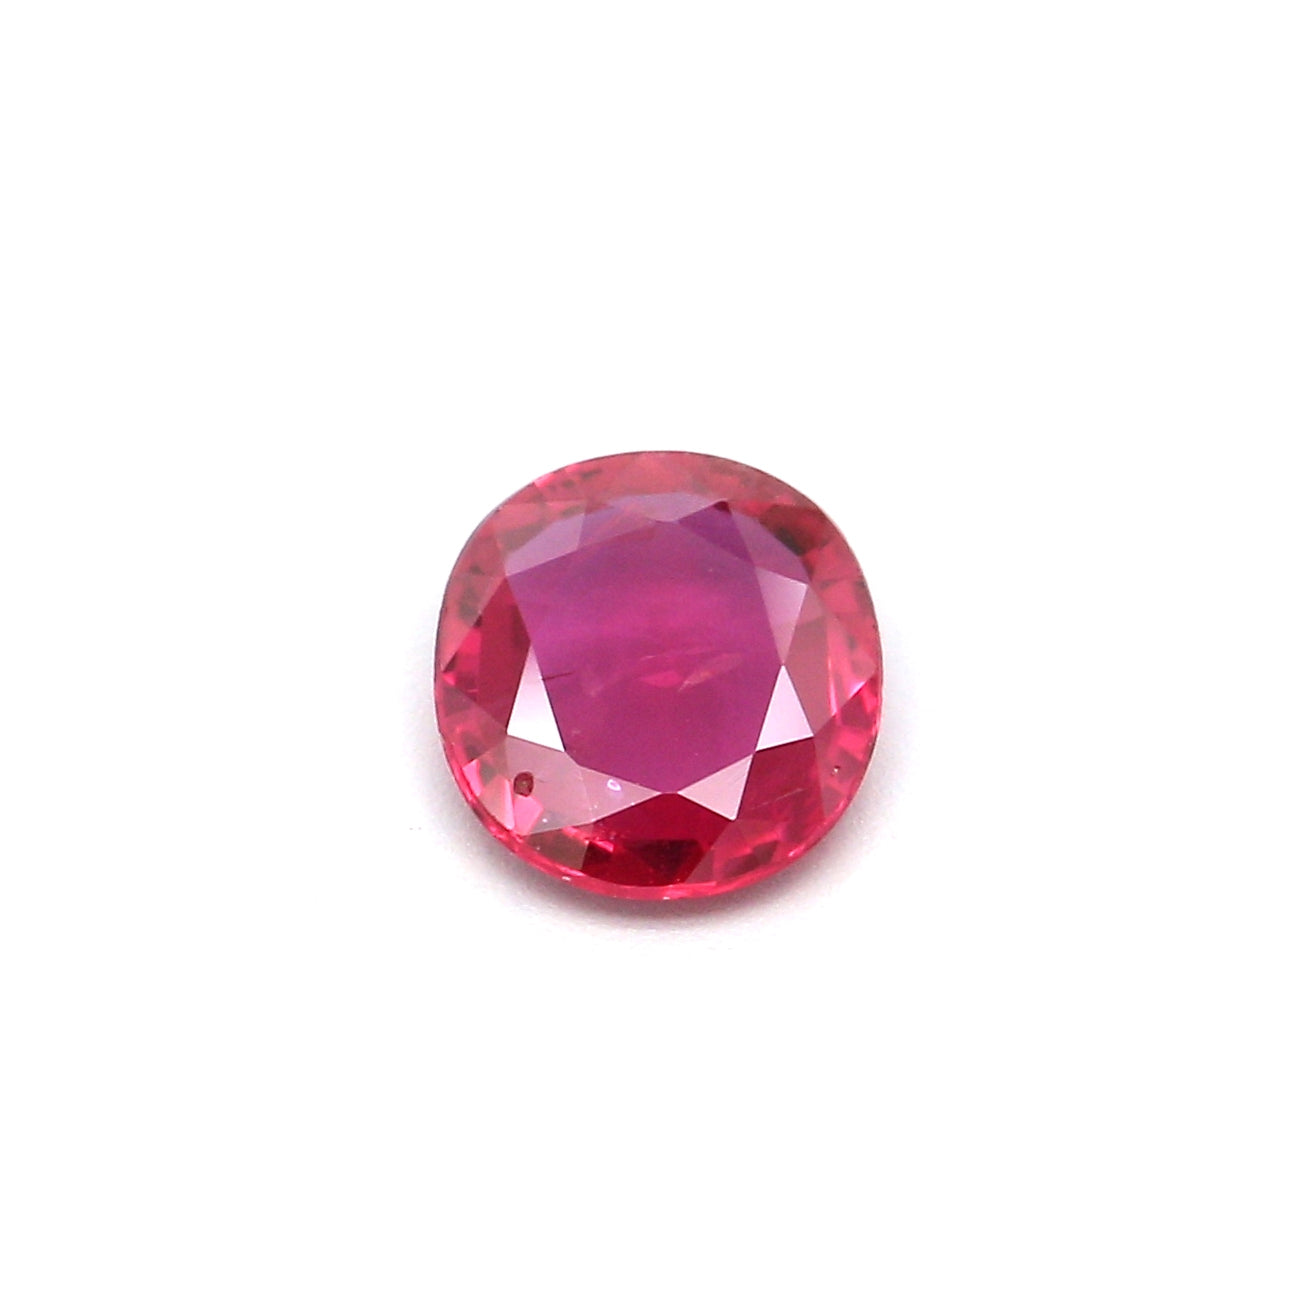 0.45ct Pinkish Red, Oval Ruby, Heated, Thailand - 5.39 x 4.93 x 1.85mm